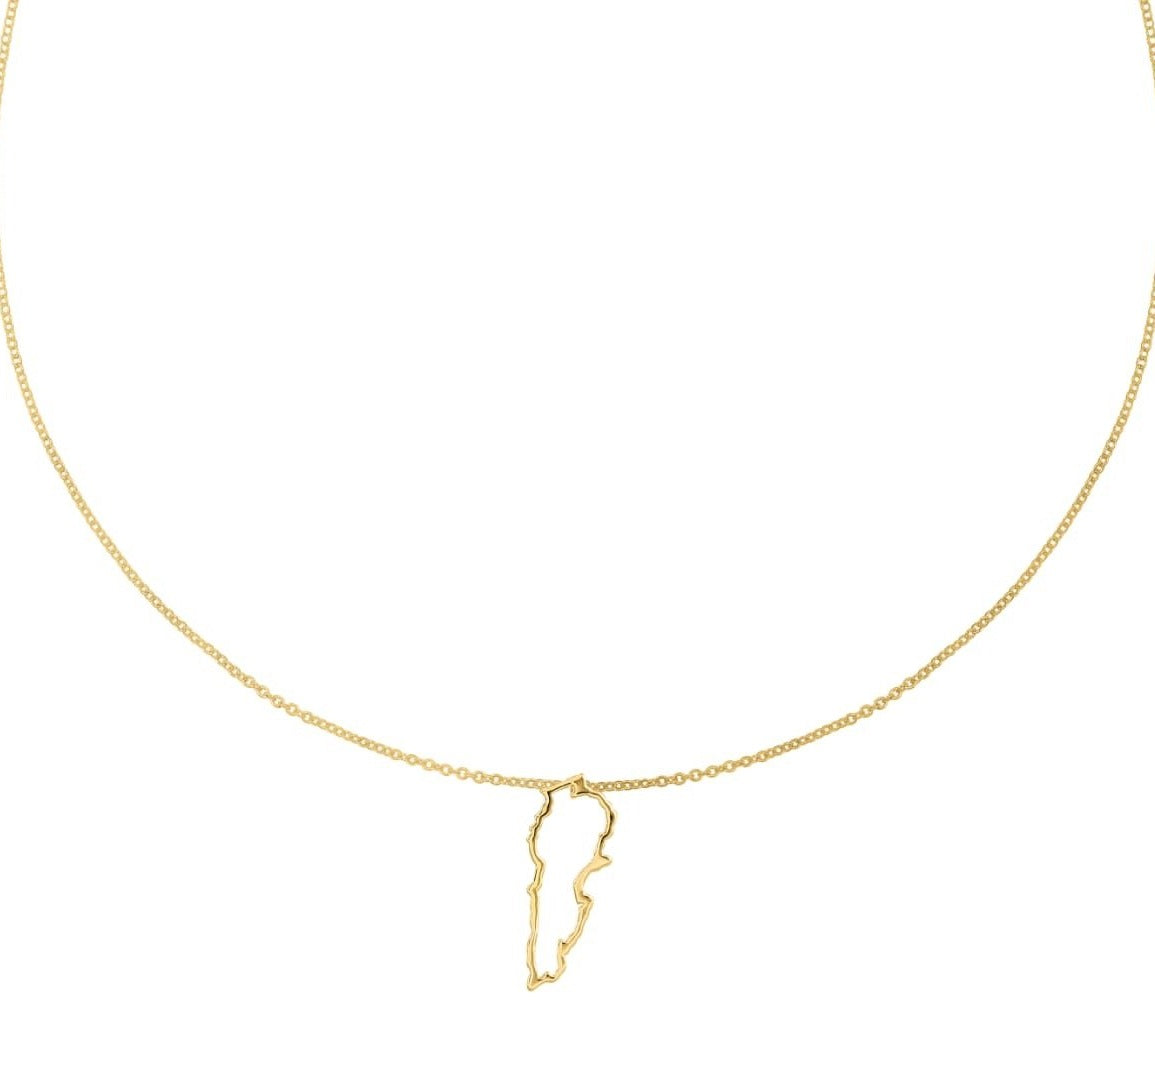 The Lebanese Simple Map Necklace